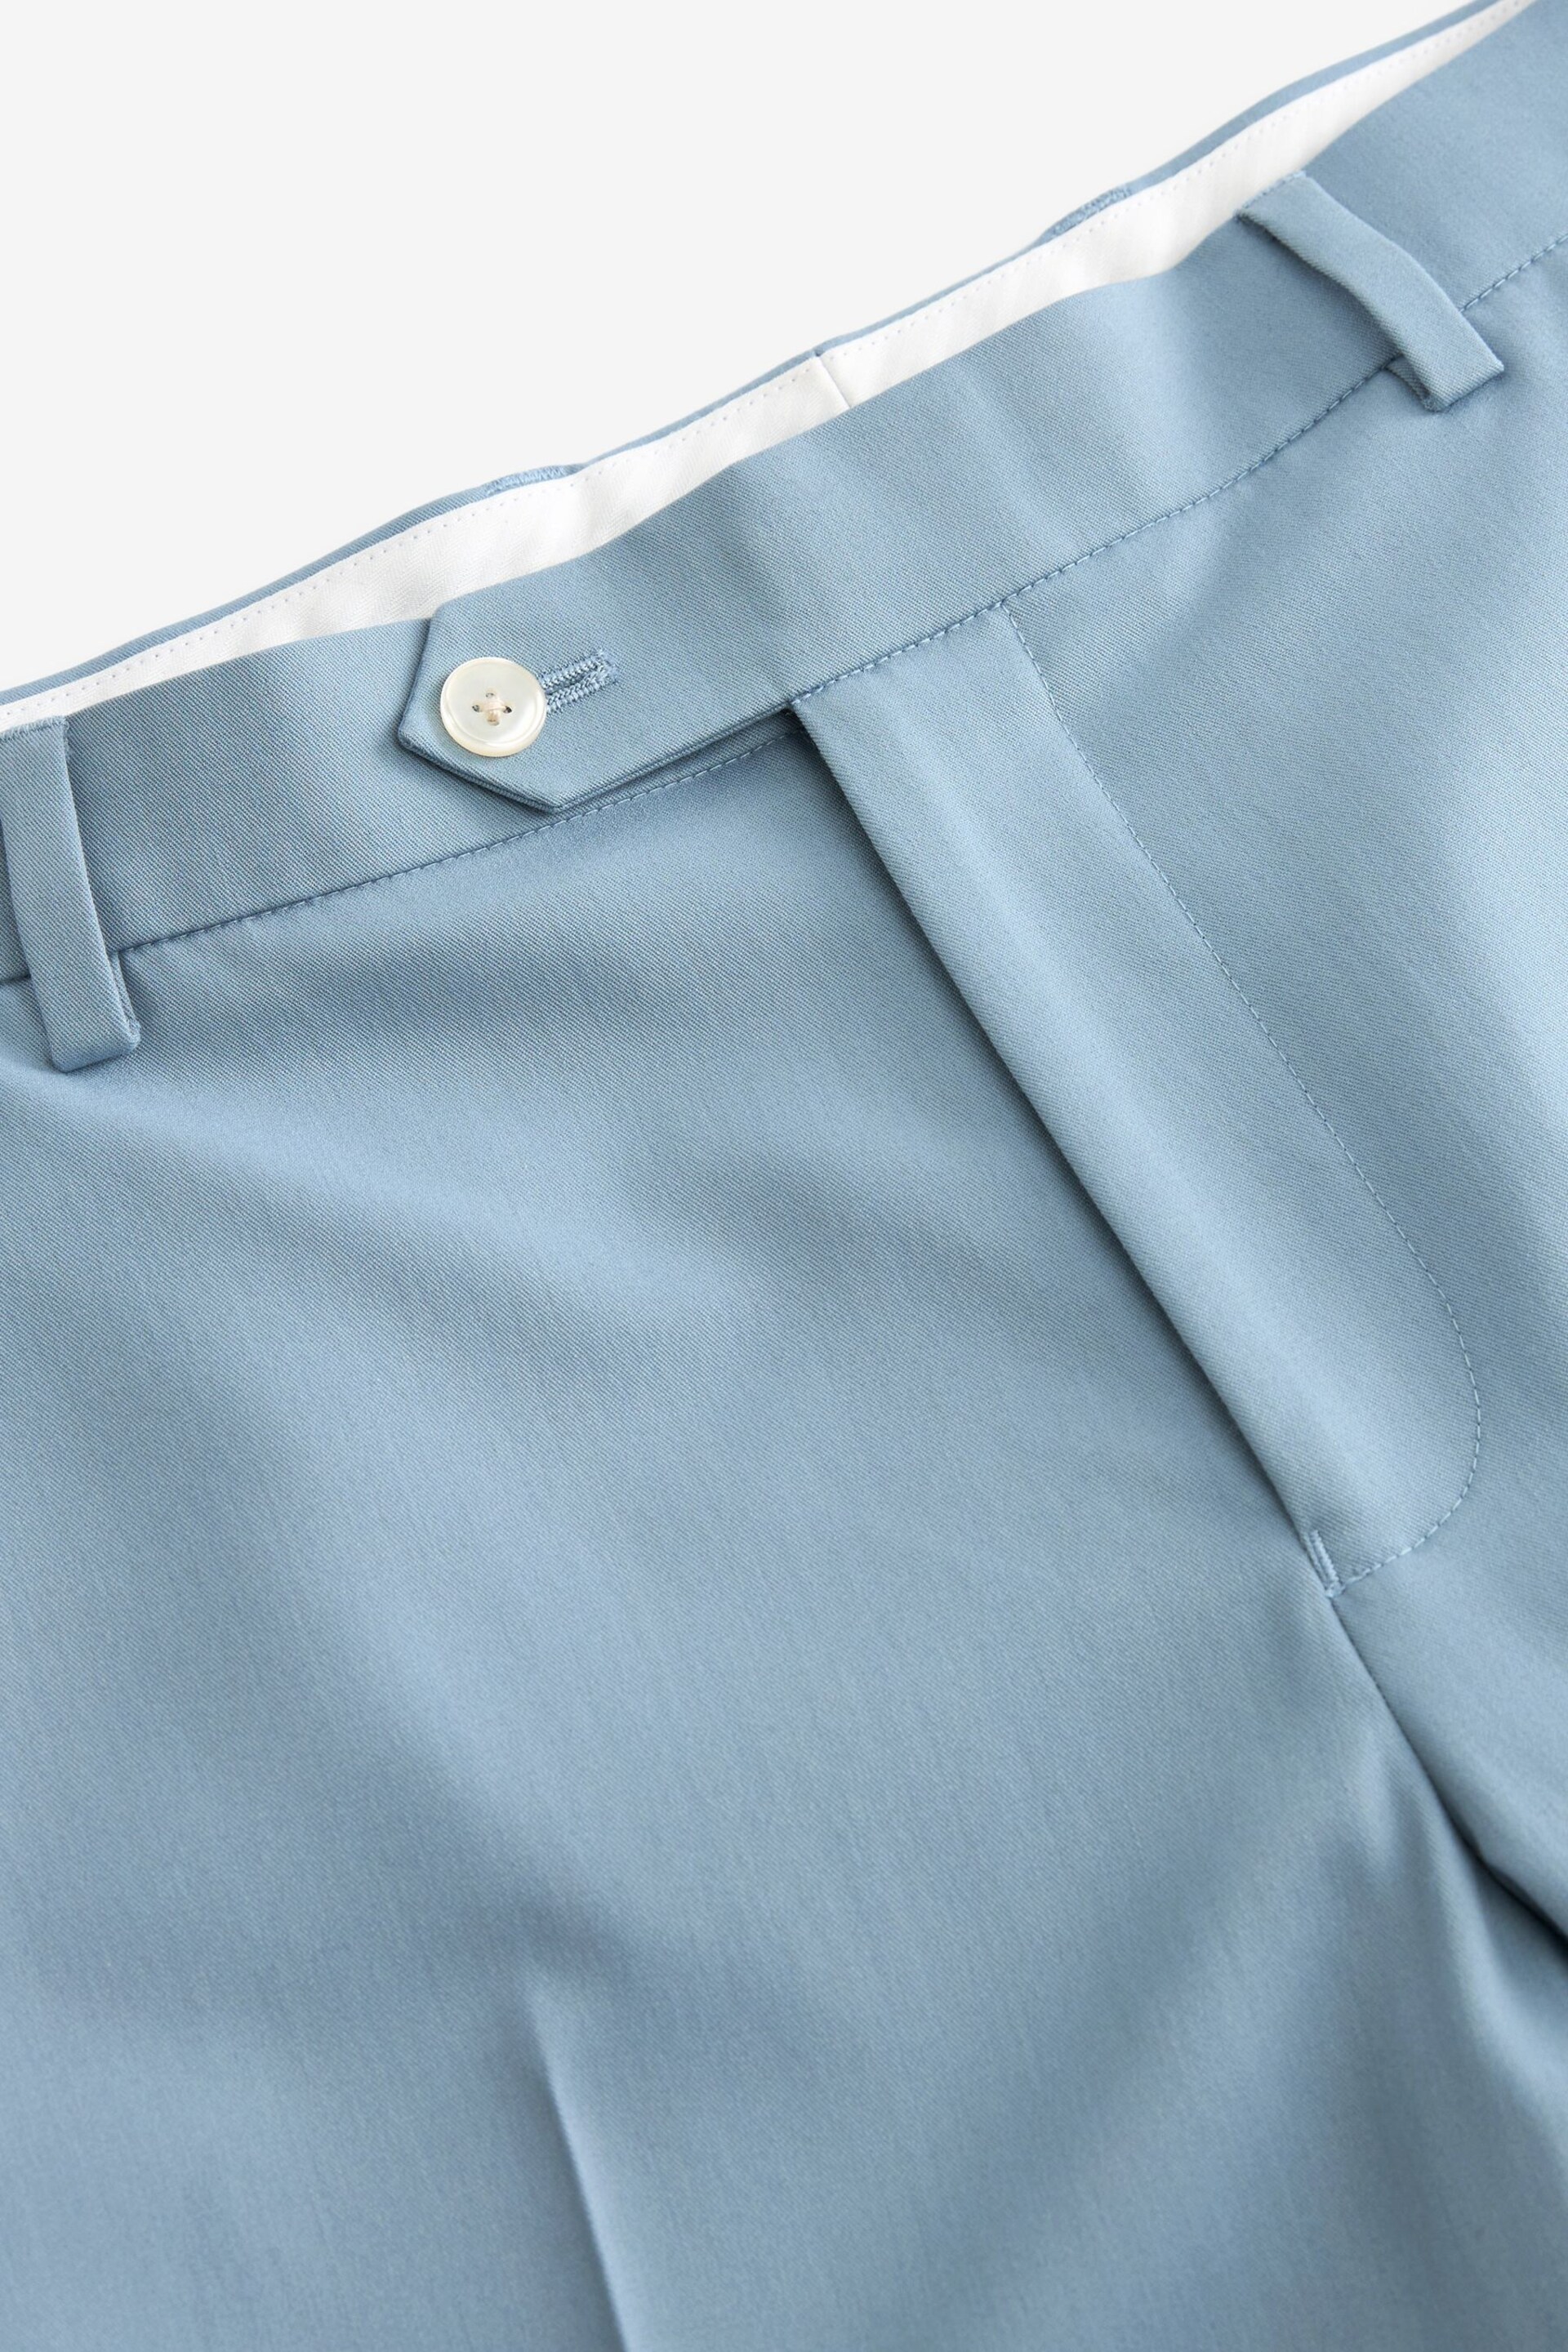 Light Blue Skinny Fit Motionflex Stretch Suit: Trousers - Image 6 of 8